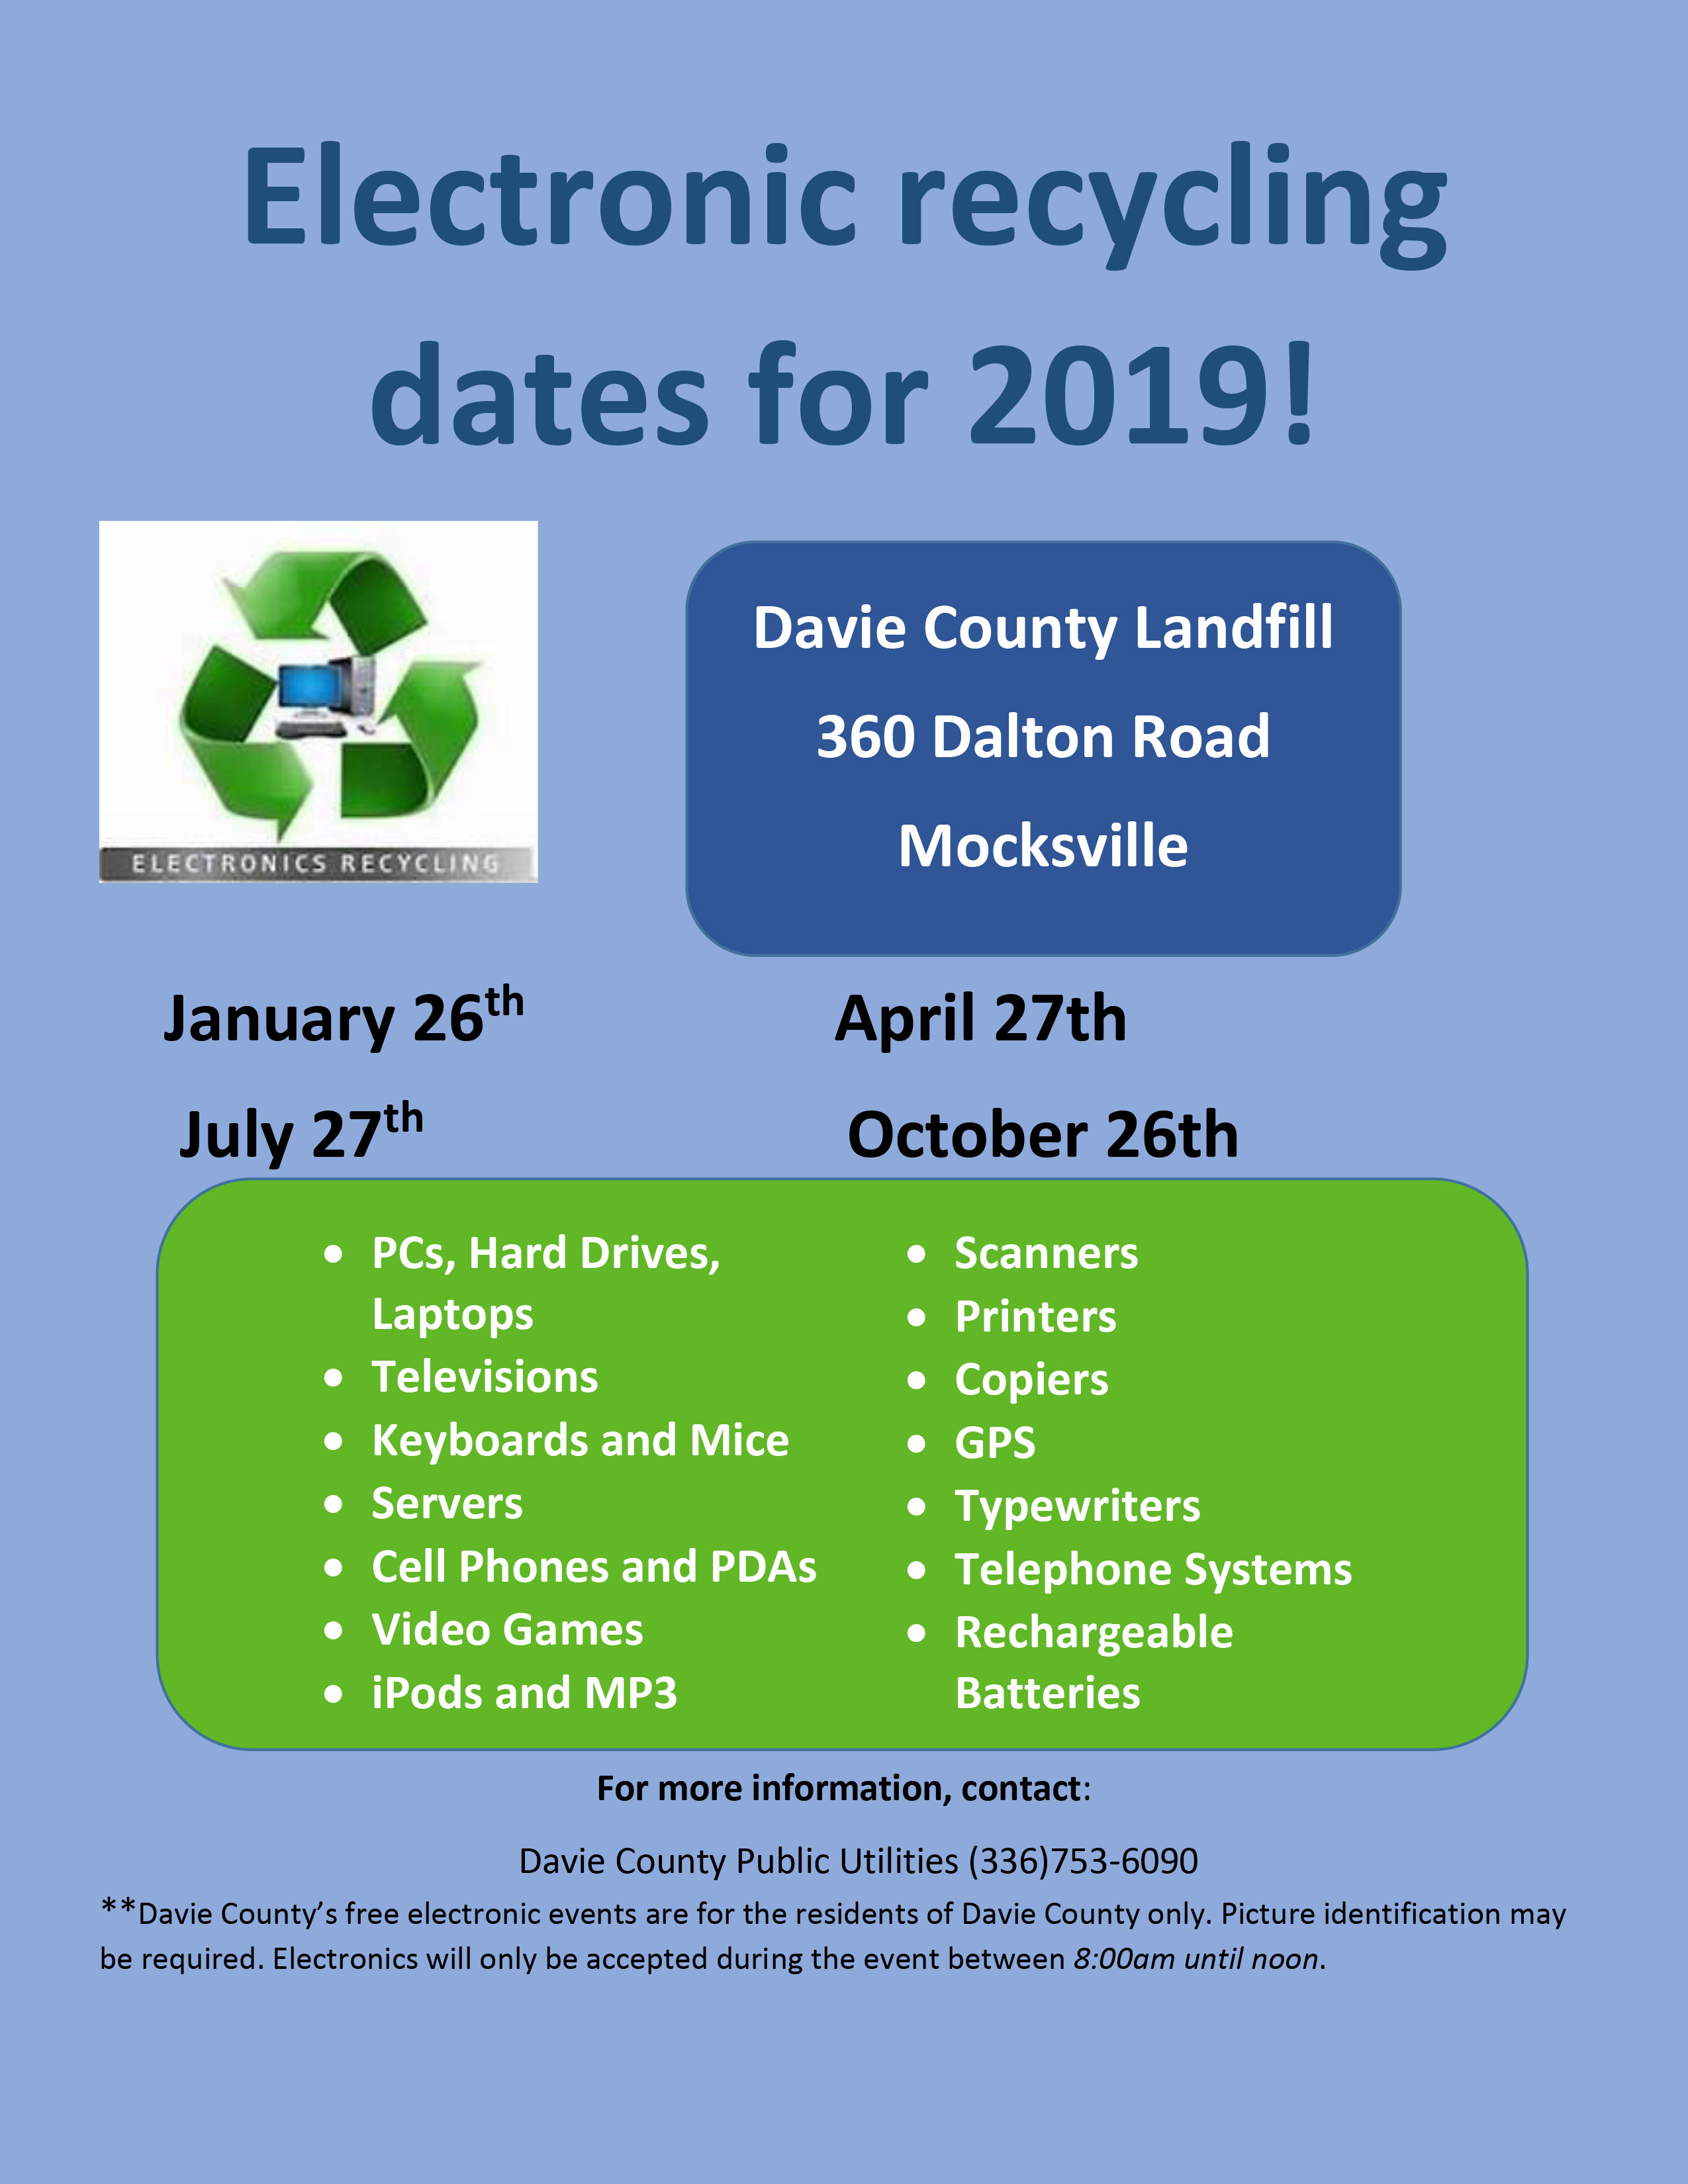 Electronic recycling dates for 2019